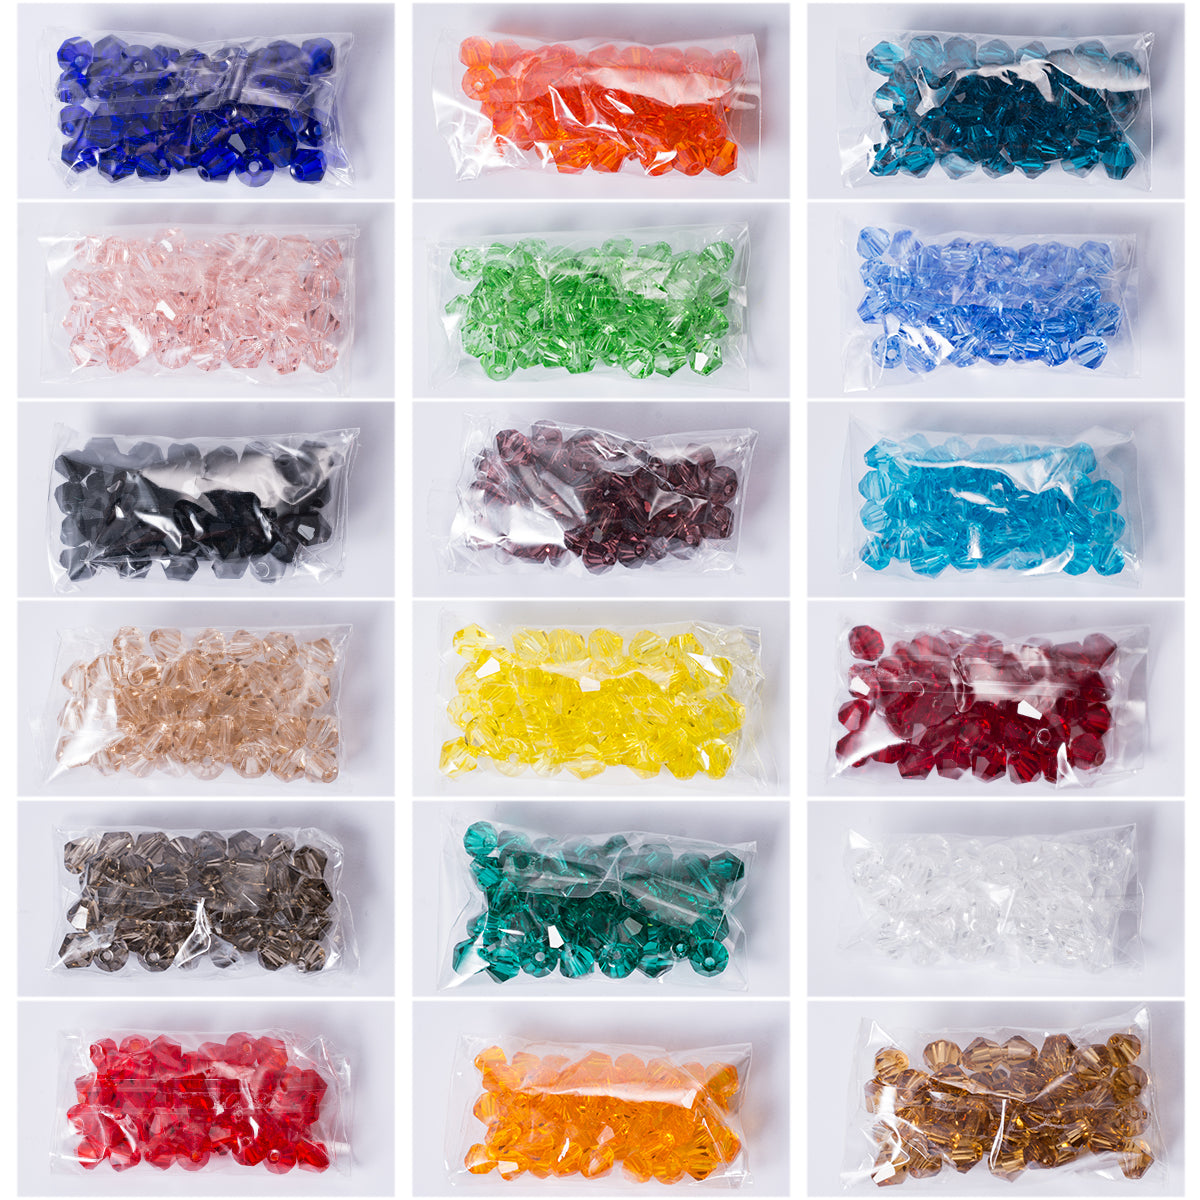 6mm Bicone Shaped Crystal Faceted Beads (900 pcs)